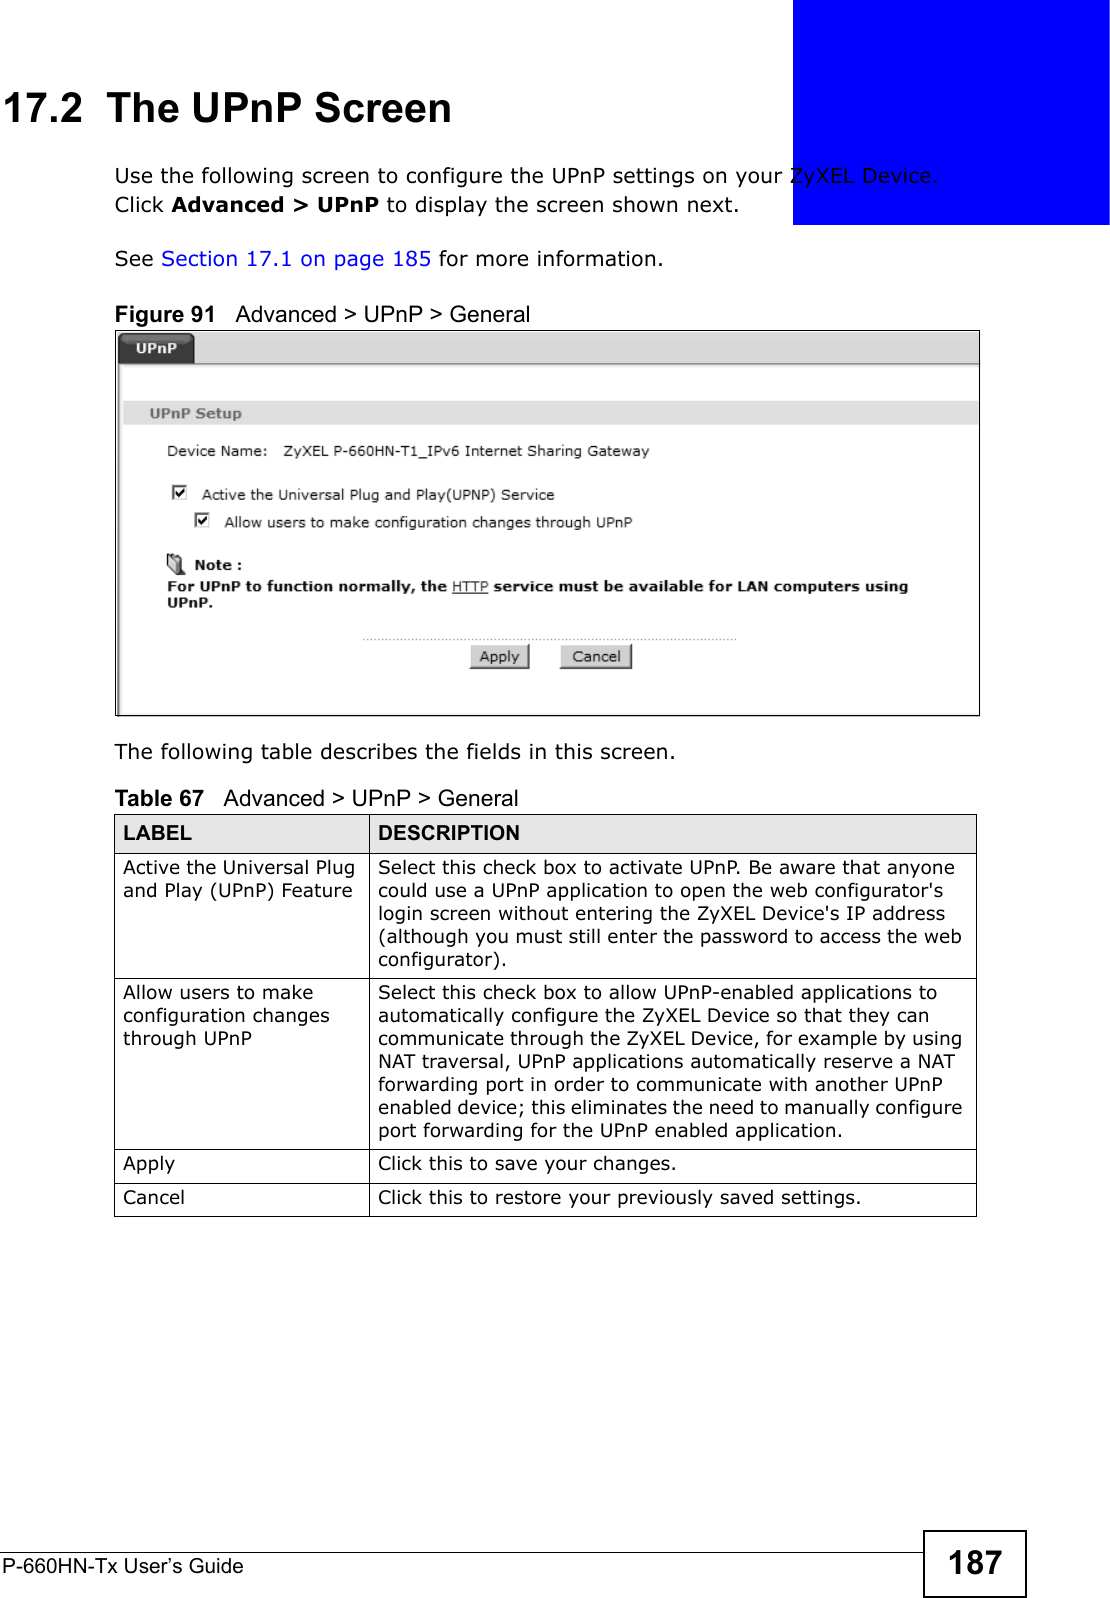 P-660HN-Tx User’s Guide 18717.2  The UPnP ScreenUse the following screen to configure the UPnP settings on your ZyXEL Device. Click Advanced &gt; UPnP to display the screen shown next.See Section 17.1 on page 185 for more information. Figure 91   Advanced &gt; UPnP &gt; GeneralThe following table describes the fields in this screen. Table 67   Advanced &gt; UPnP &gt; GeneralLABEL DESCRIPTIONActive the Universal Plug and Play (UPnP) FeatureSelect this check box to activate UPnP. Be aware that anyone could use a UPnP application to open the web configurator&apos;s login screen without entering the ZyXEL Device&apos;s IP address (although you must still enter the password to access the web configurator).Allow users to make configuration changes through UPnPSelect this check box to allow UPnP-enabled applications to automatically configure the ZyXEL Device so that they can communicate through the ZyXEL Device, for example by using NAT traversal, UPnP applications automatically reserve a NAT forwarding port in order to communicate with another UPnP enabled device; this eliminates the need to manually configure port forwarding for the UPnP enabled application. Apply Click this to save your changes.Cancel Click this to restore your previously saved settings.